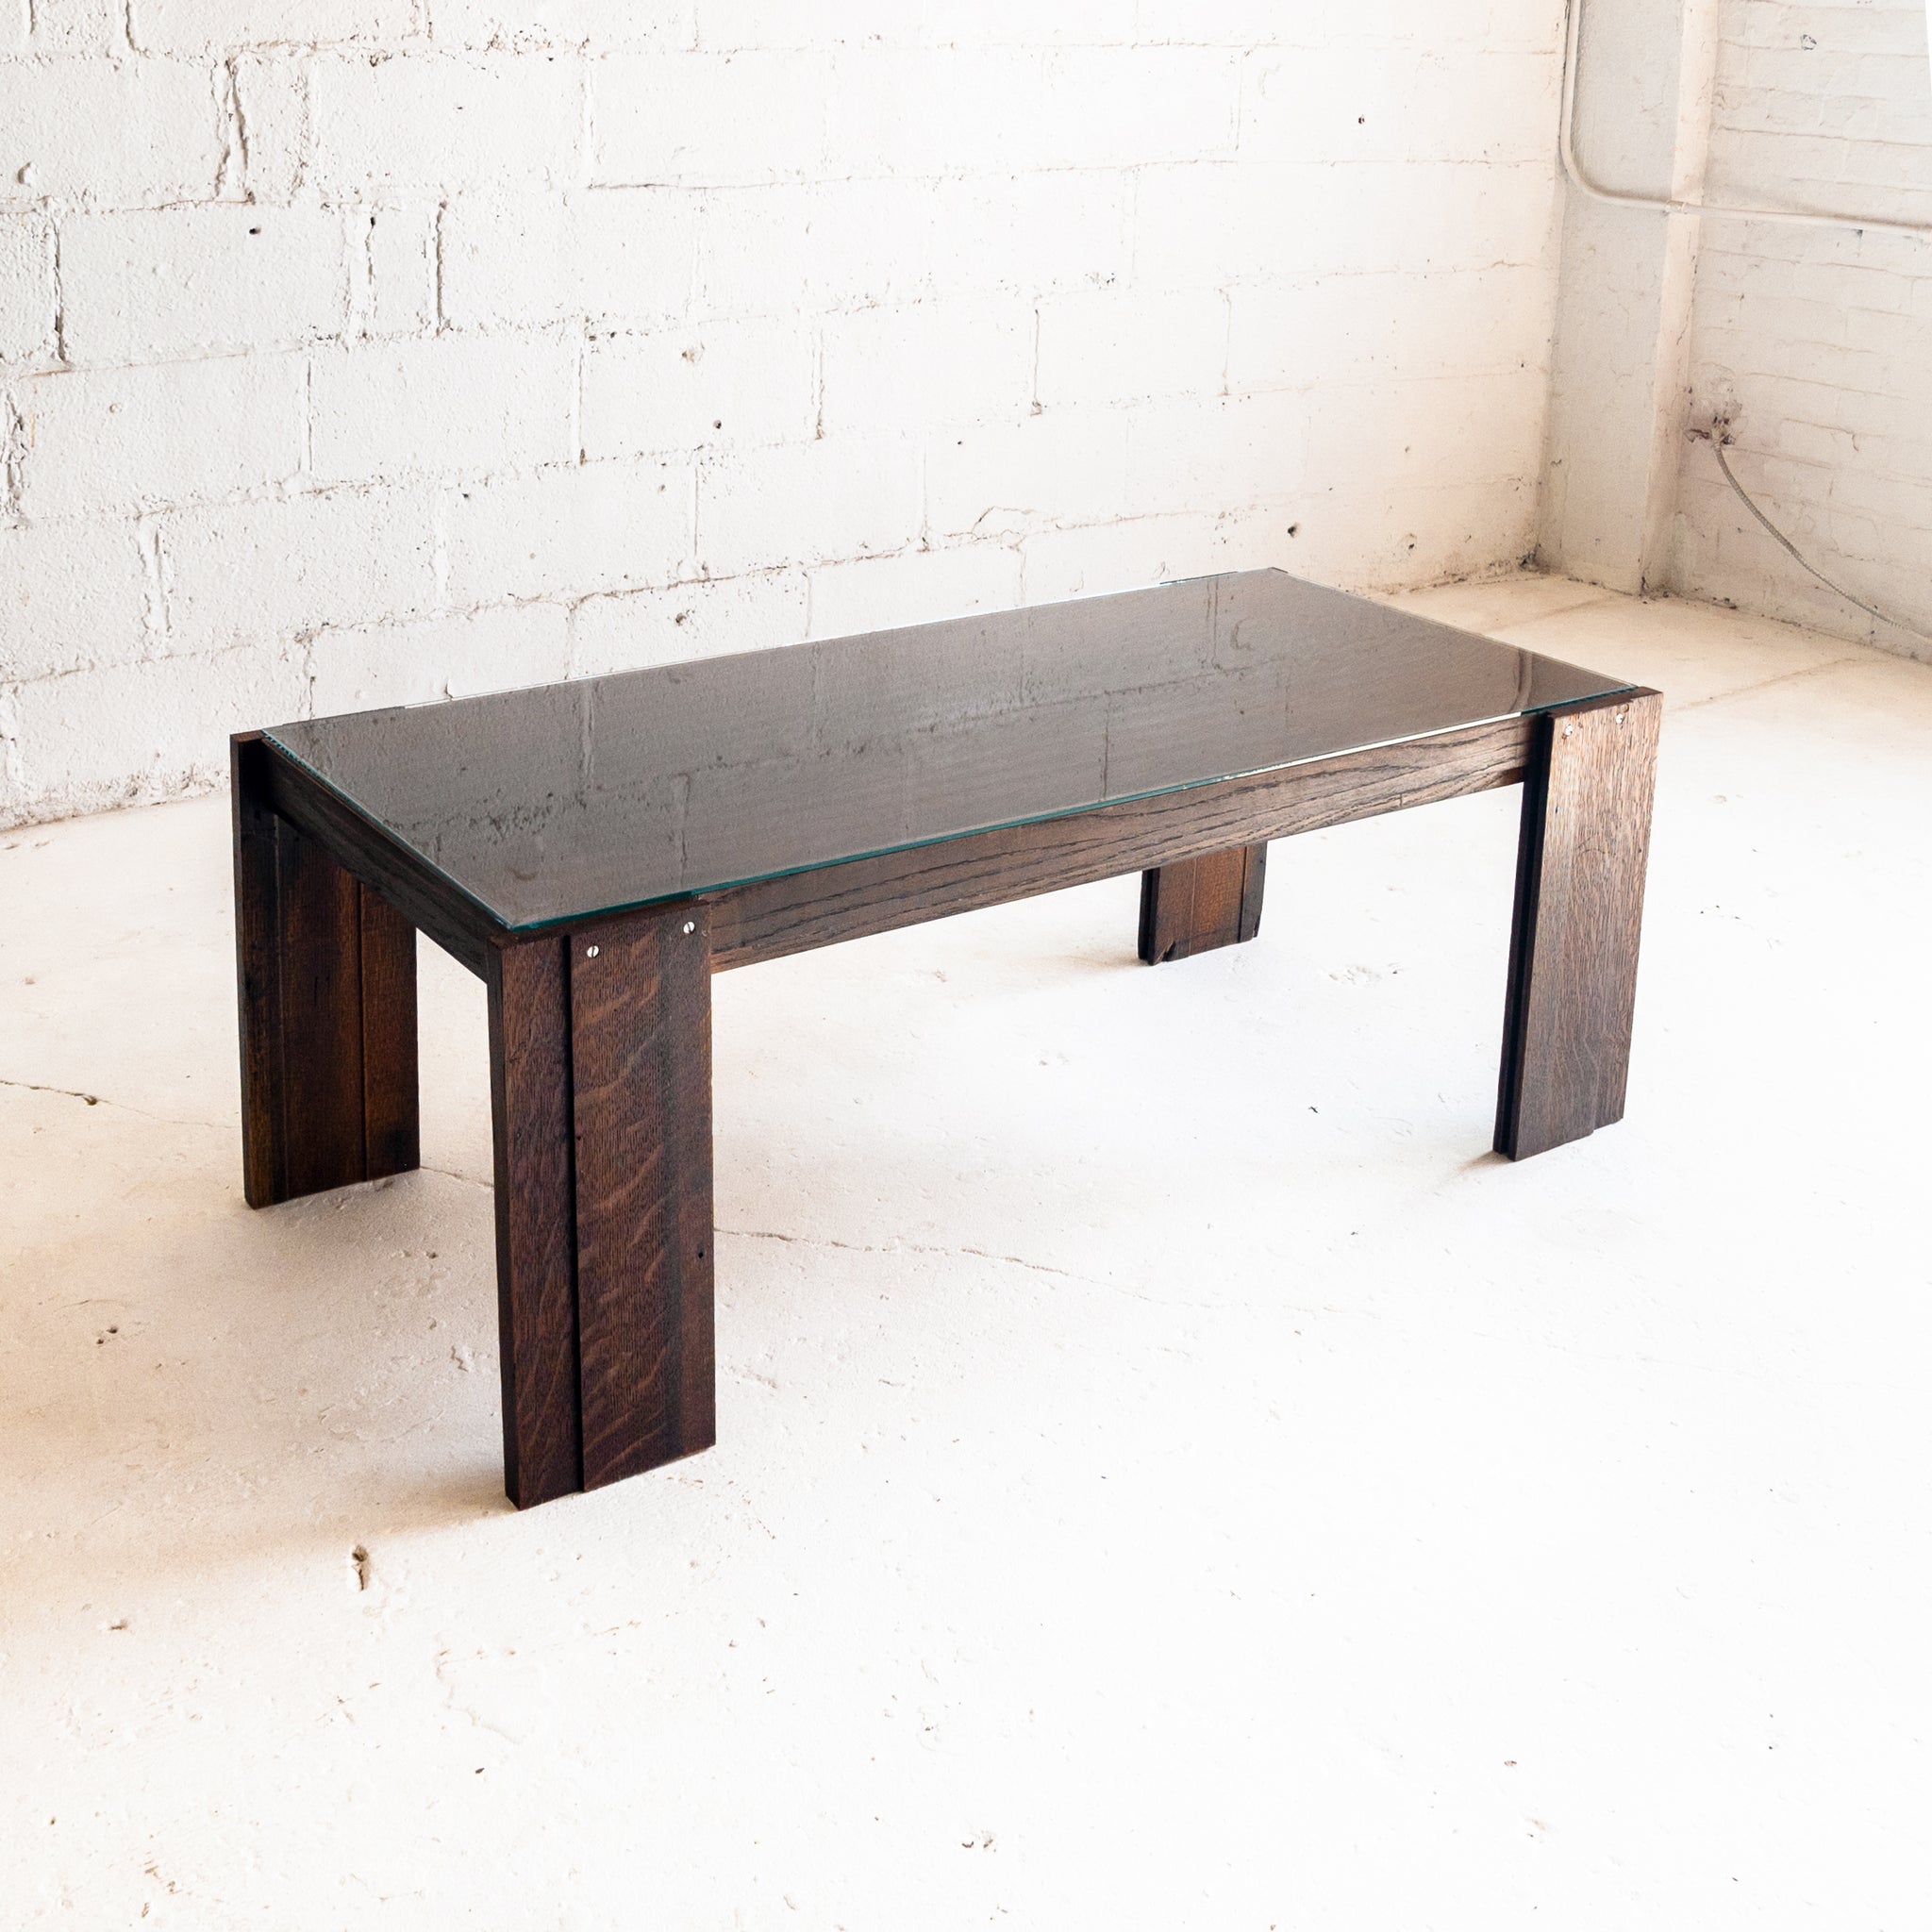 MCS coffee table full view reclaimed wood